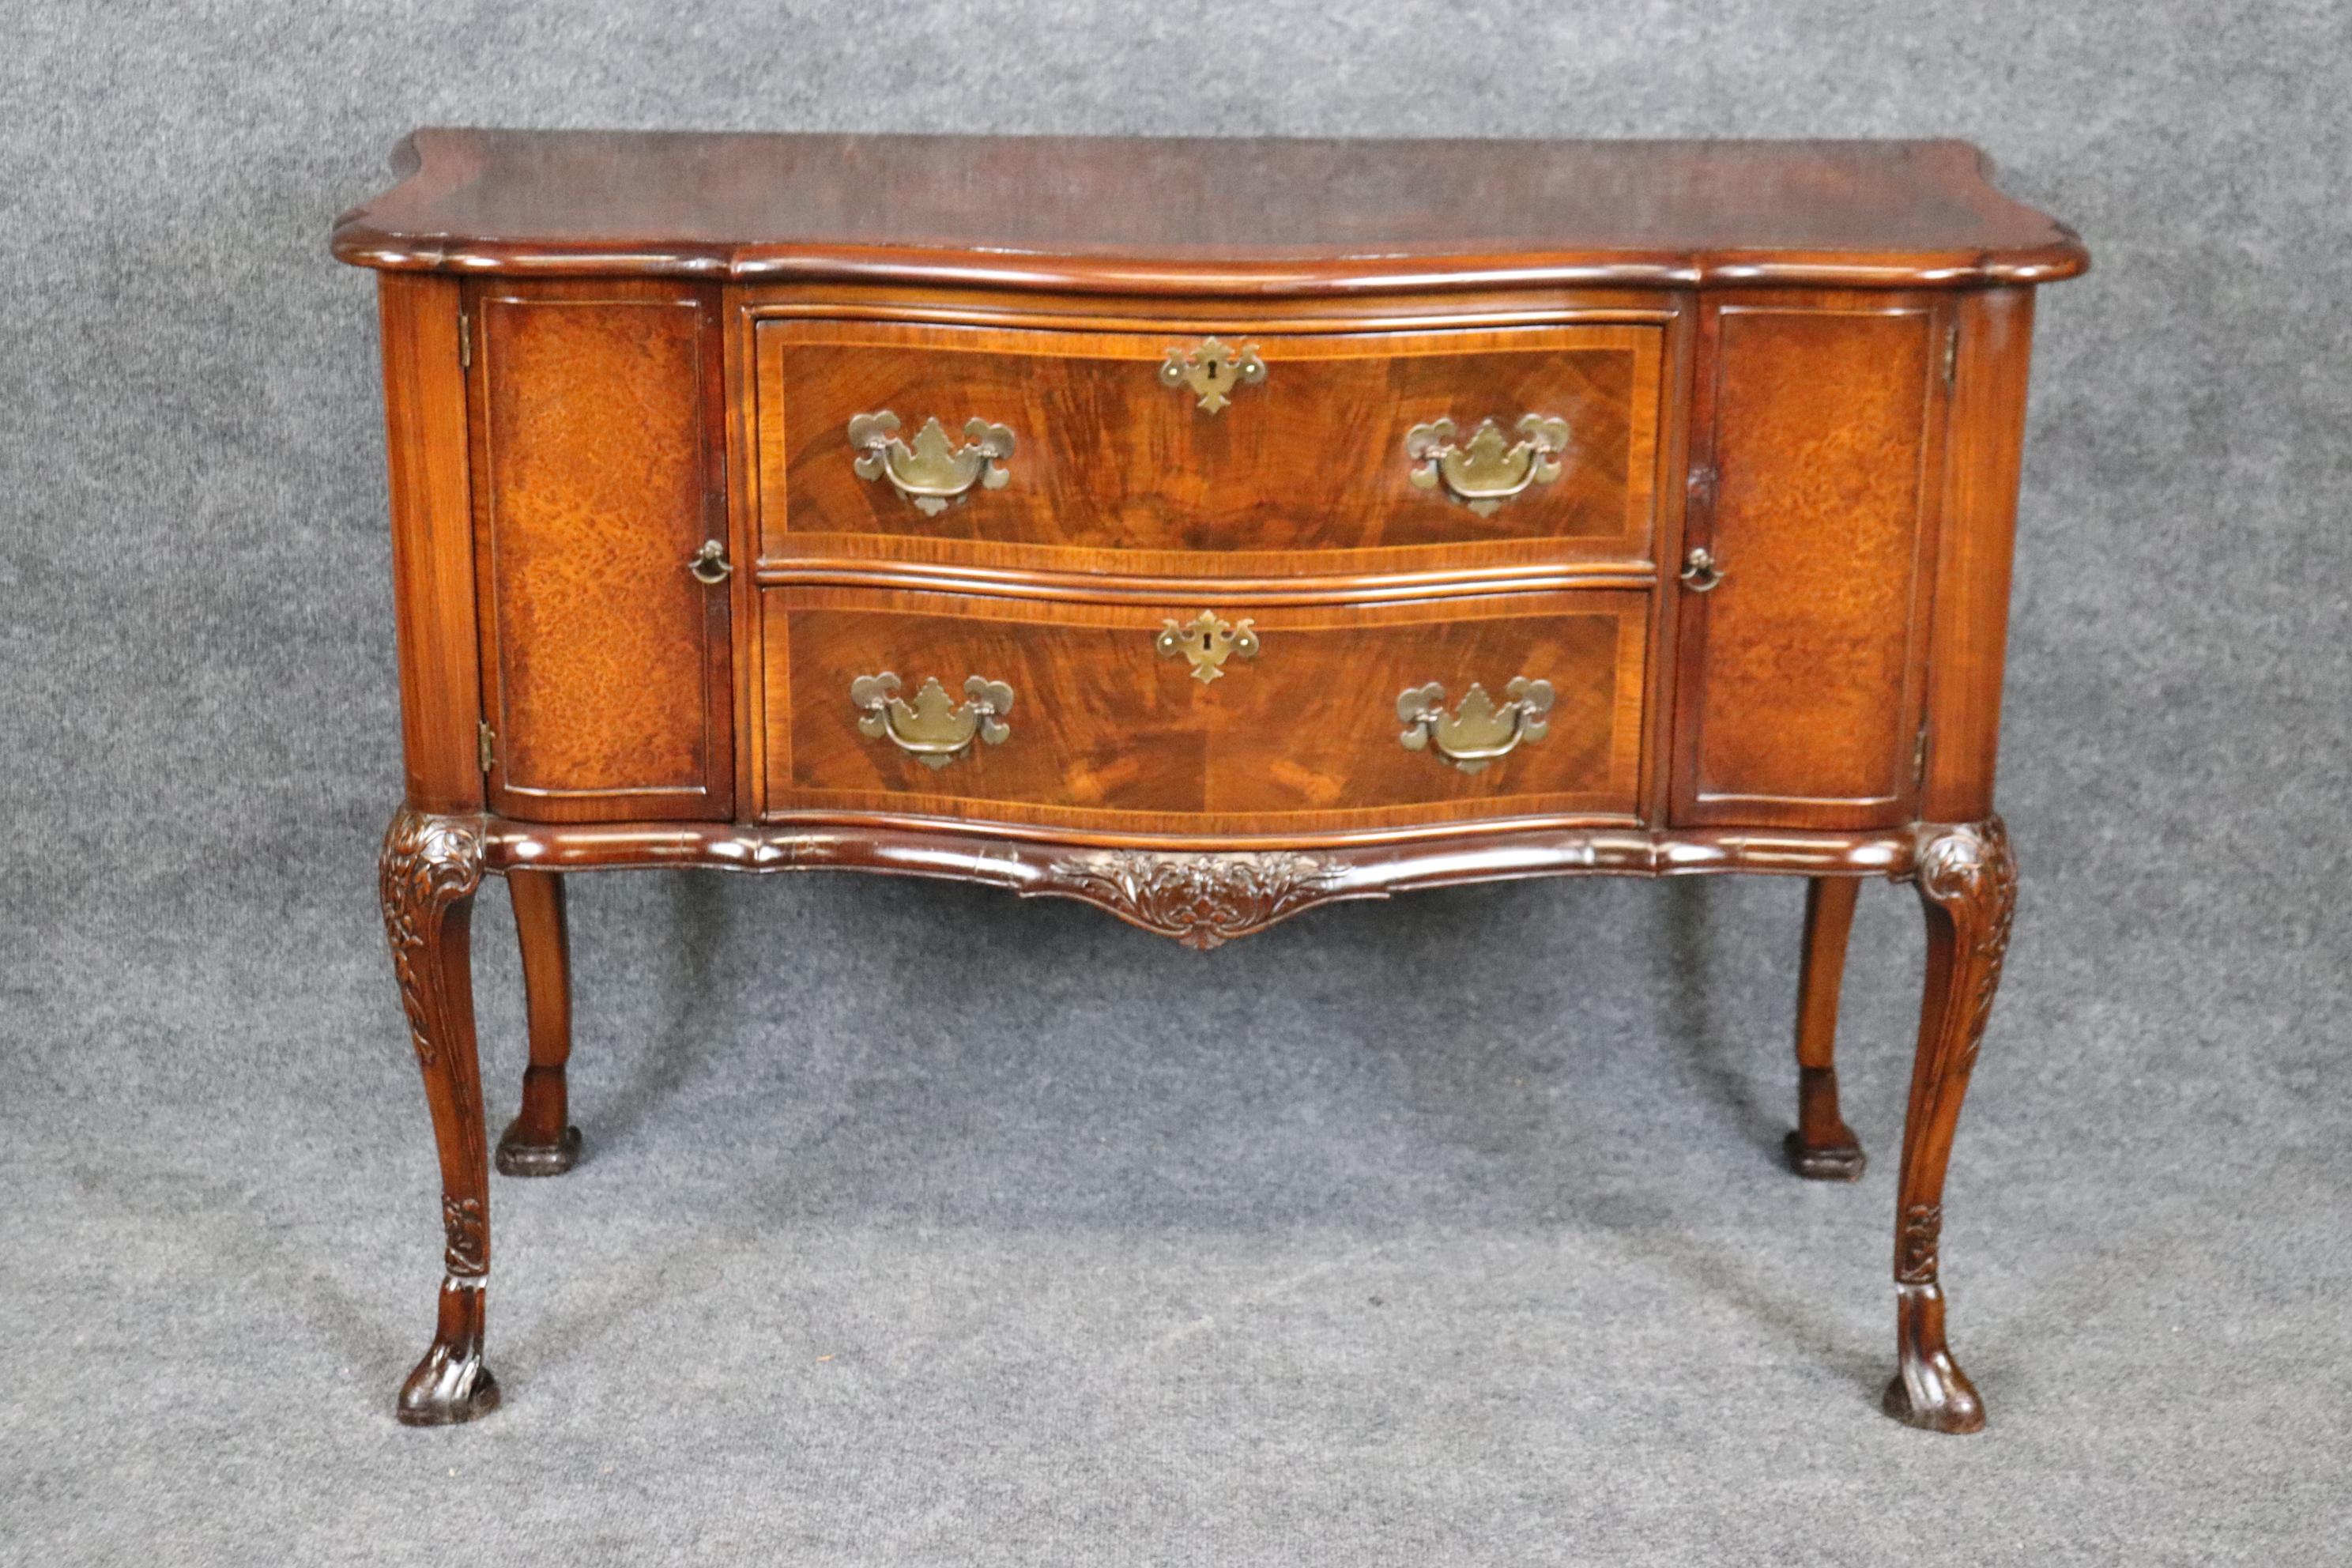 Dimensions:  Height: 33 1/4 in  Width: 47 1/4 in  Depth:  21 in

This Georgian style carved mahogany commode buffet chest of drawers is truly incredible!  If you look at the photos provided, you will see the attention to detail in the carvings. This